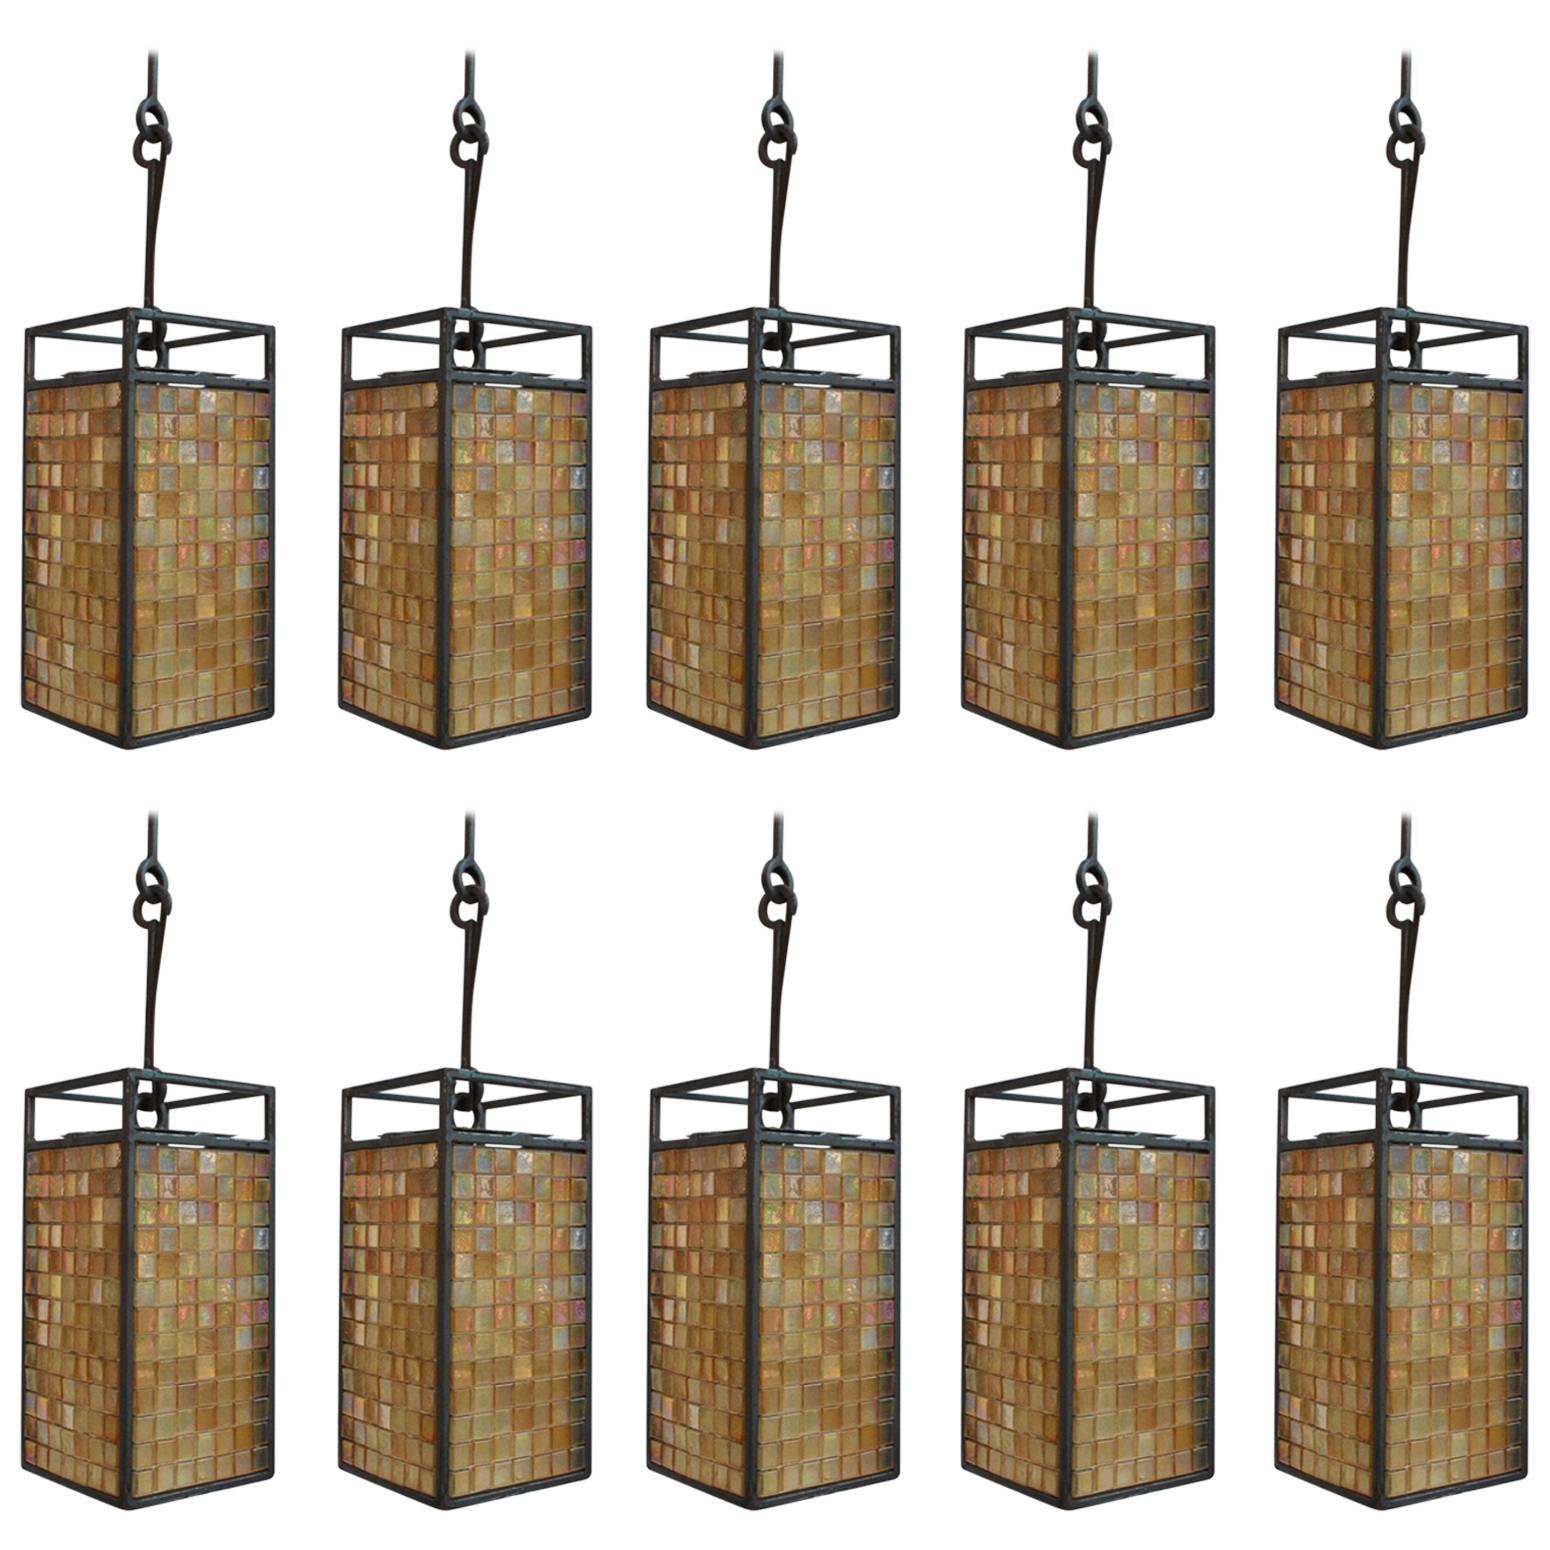 Rare Set of Ten Mosaic Tiles Lights Industrial Style For Sale